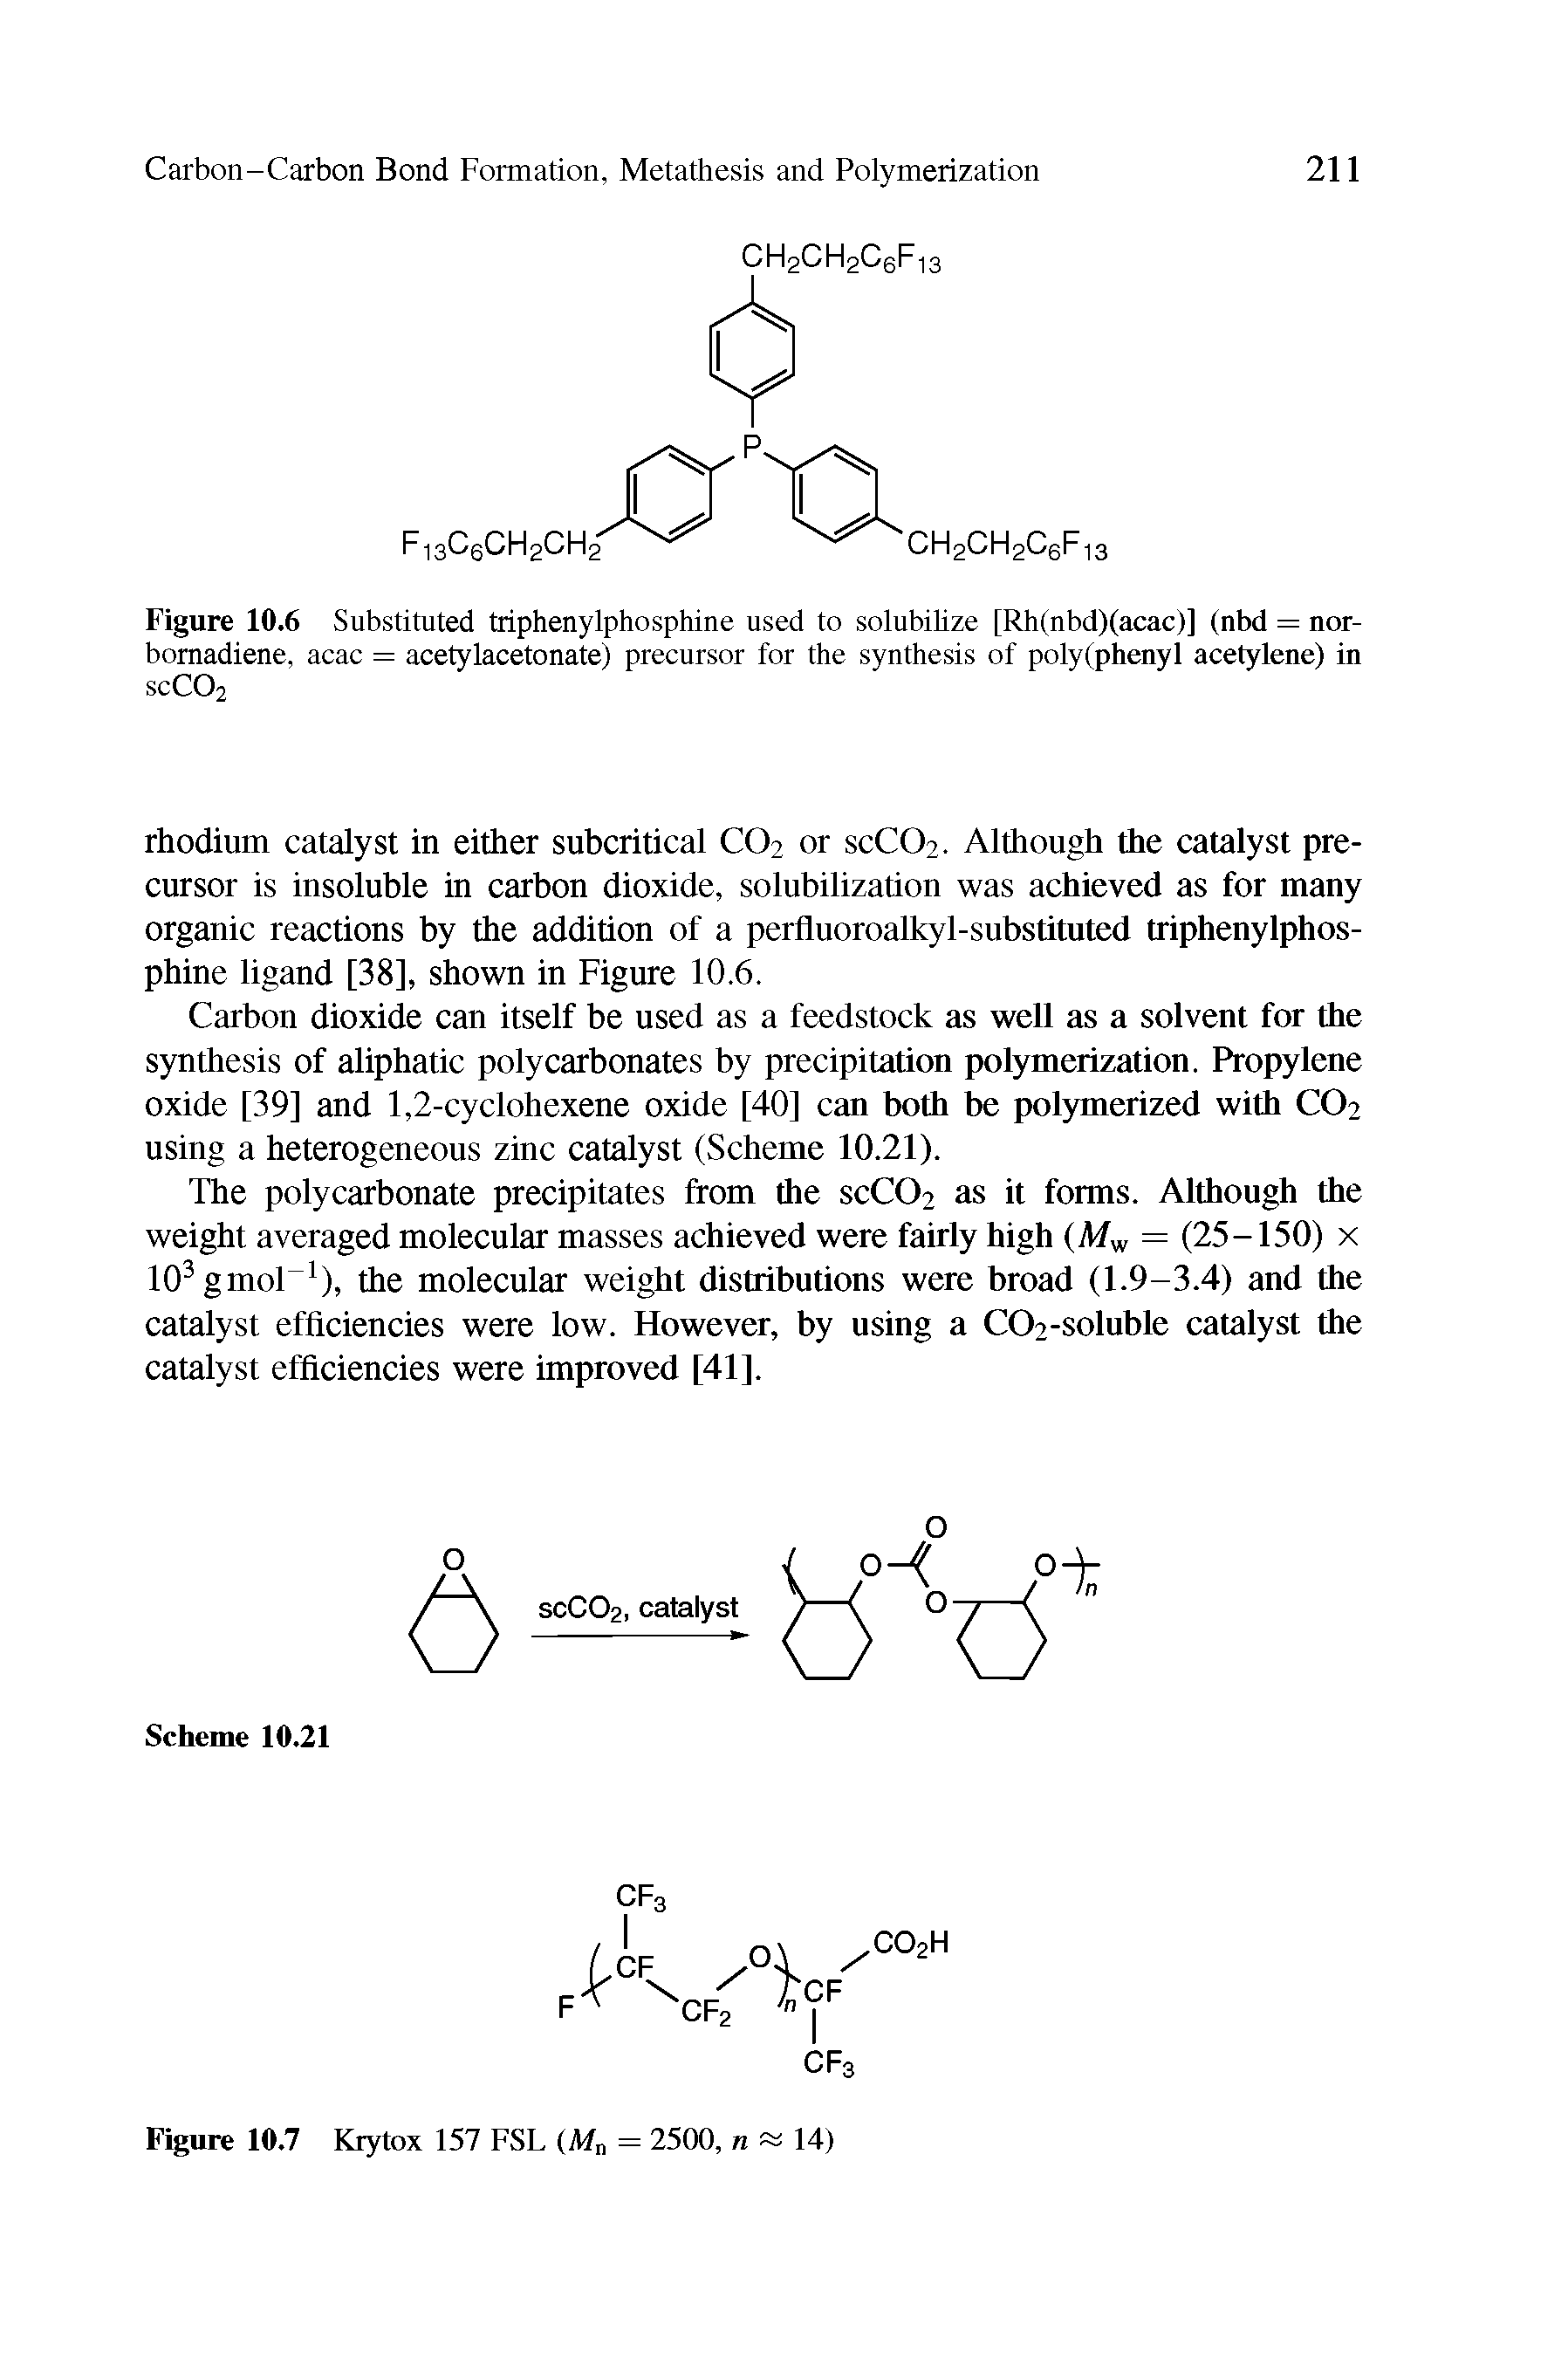 Figure 10.6 Substituted triphenylphosphine used to solubilize [Rh(nbd)(acac)] (nbd = nor-bornadiene, acac = acetylacetonate) precursor for the synthesis of poly(phenyl acetylene) in scC02...